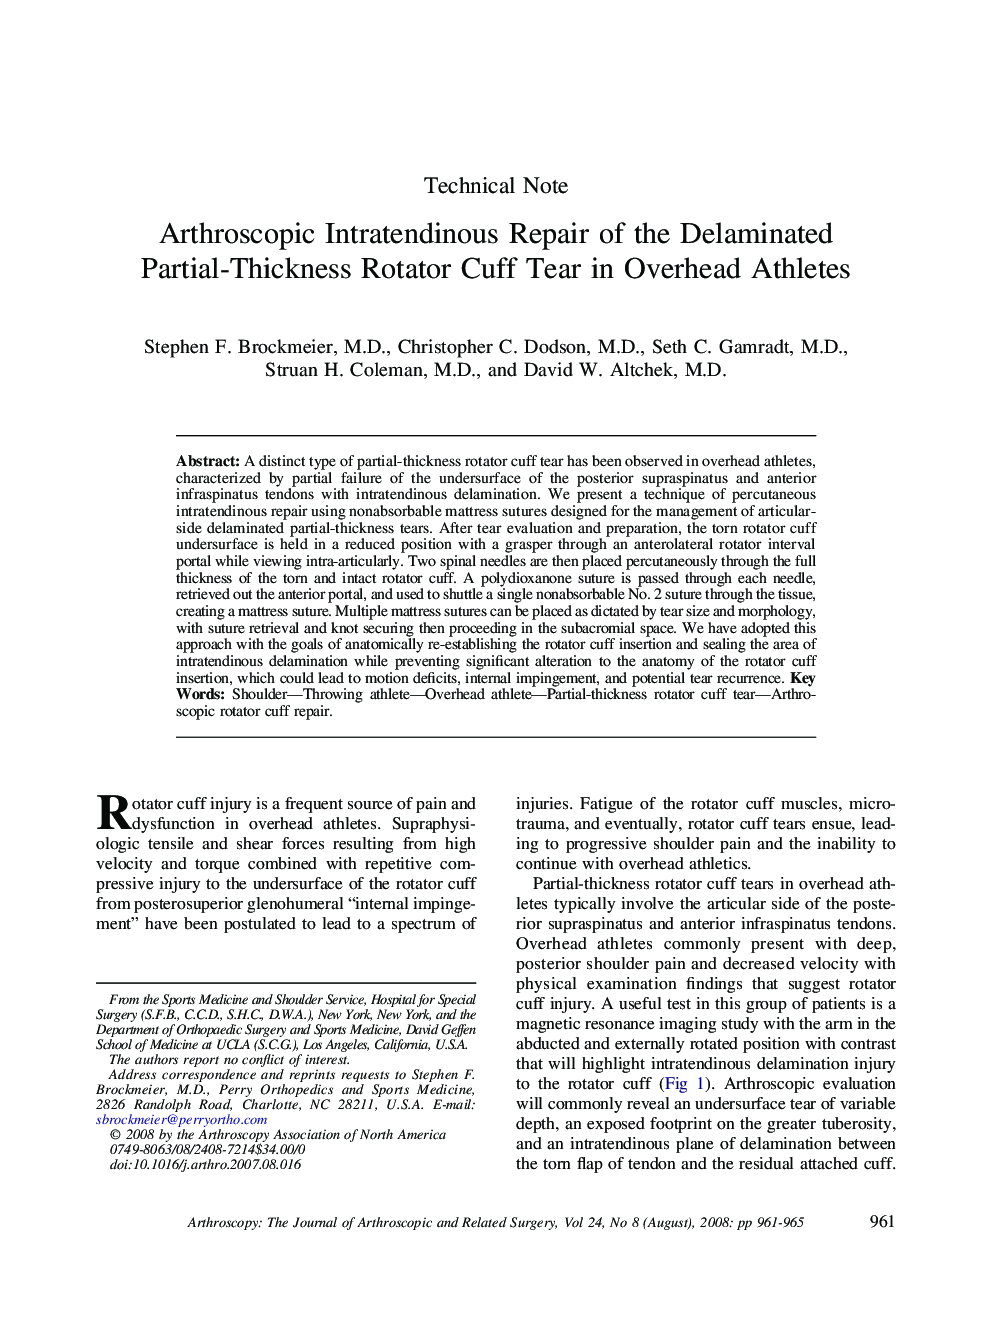 Arthroscopic Intratendinous Repair of the Delaminated Partial-Thickness Rotator Cuff Tear in Overhead Athletes 